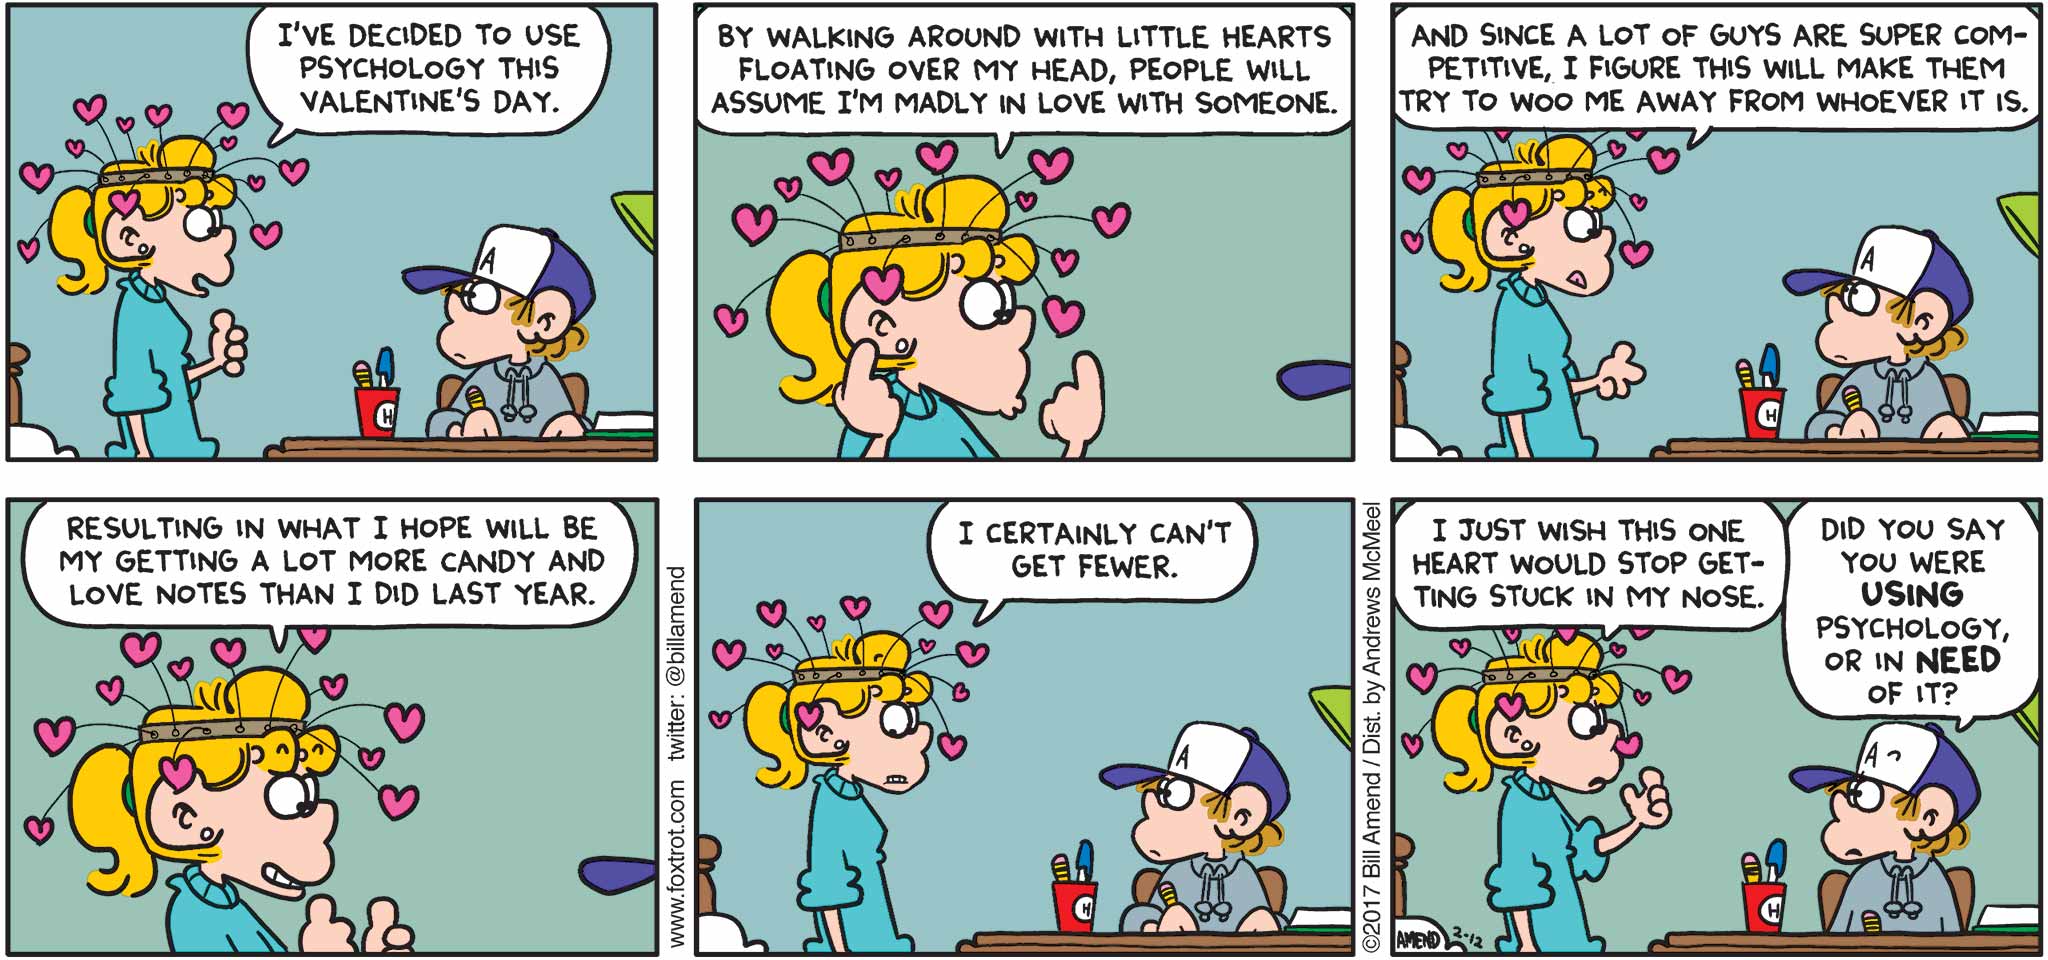 FoxTrot by Bill Amend - "Heart Hat" published February 12, 2017 - Paige says: I've decided to use psychology this Valentine's Day. By walking around with little hearts floating over my head, people will assume I'm madly in love with someone. And since a lot of guys are super competitive, I figure this will make them try to woo me away from whoever it is. Resulting in what I hope will be my getting a lot more candy and love notes than I did last year. I certainly can't get fewer. I just wish this one heart would stop getting stuck in my nose. Peter says: Did you say you were using psychology, or in need of it?